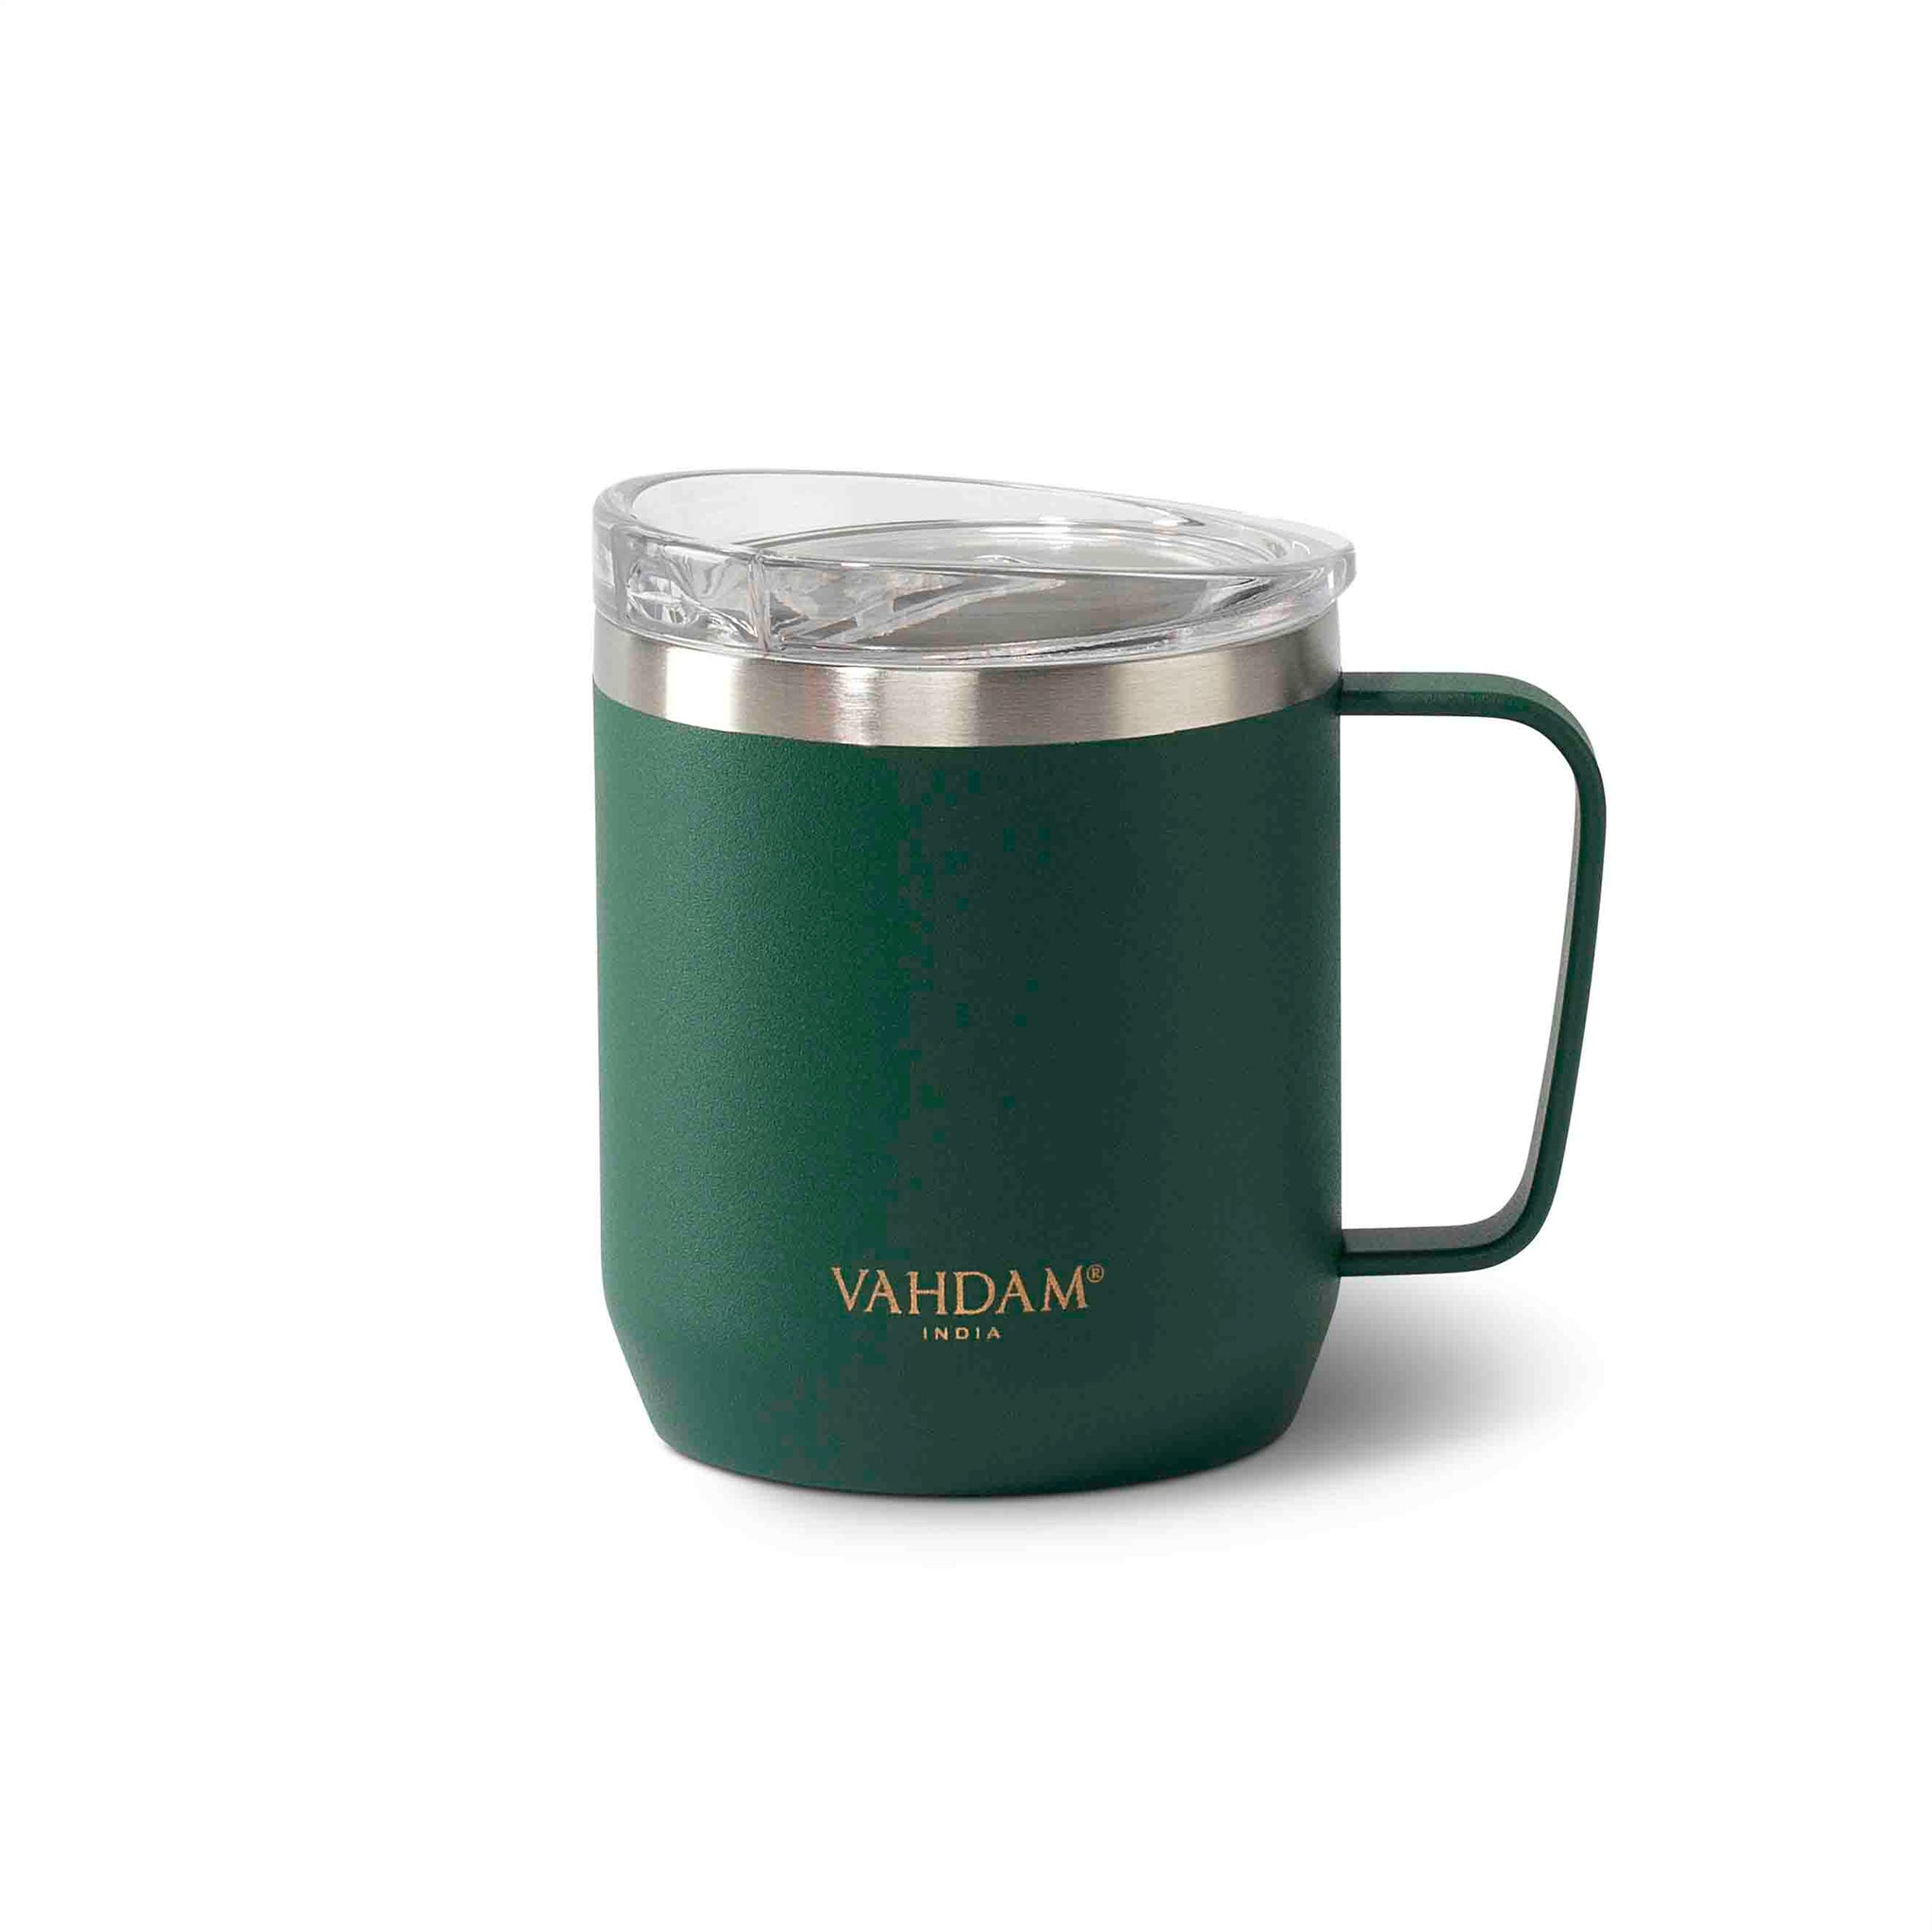  Stainless Steel Coffee Mug With Handle (300ml) - Green, Vacuum  Insulated, Double Wall, Sweat-Proof Mug With Slider Lid For Hot And Cold  Drinks, Coffee/Tea Mug